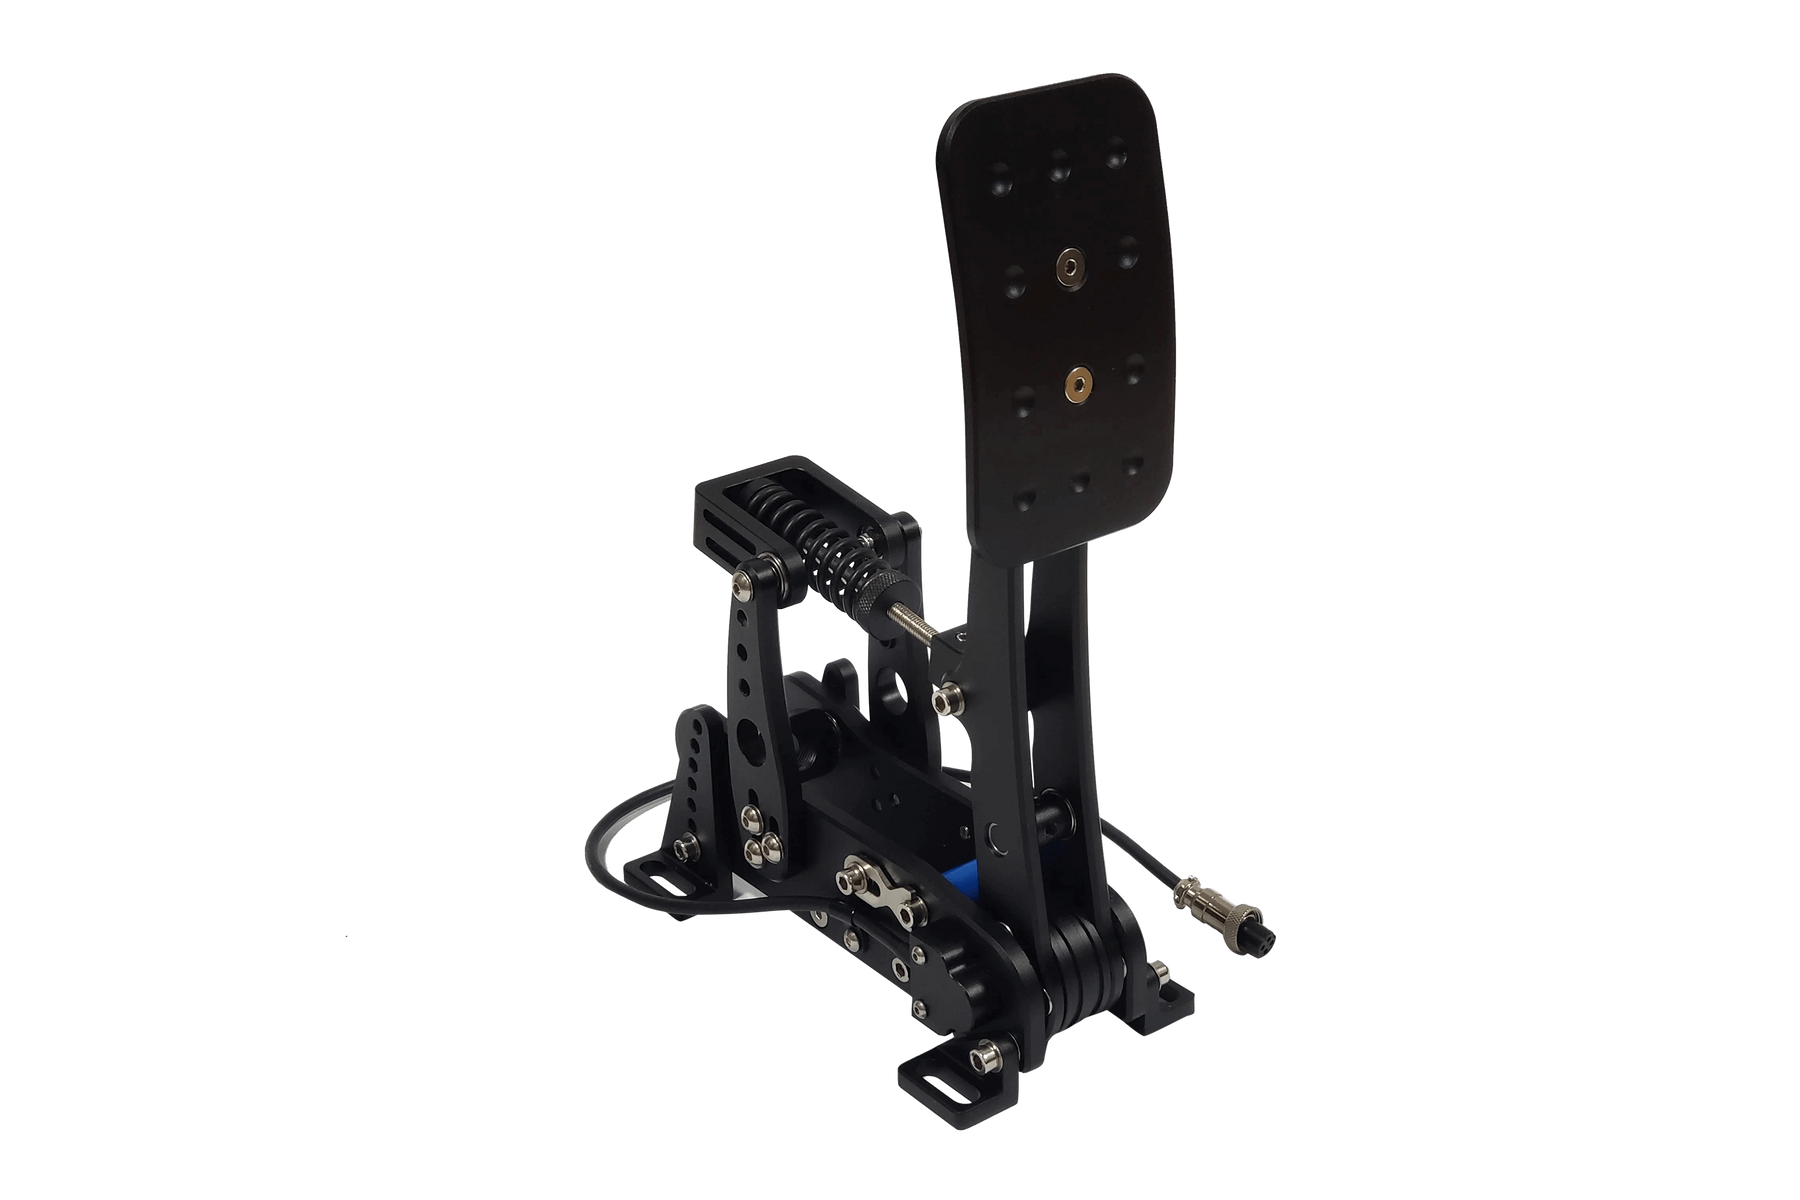  Extreme Sim Racing Inverted Pedals Kit Upgrade for